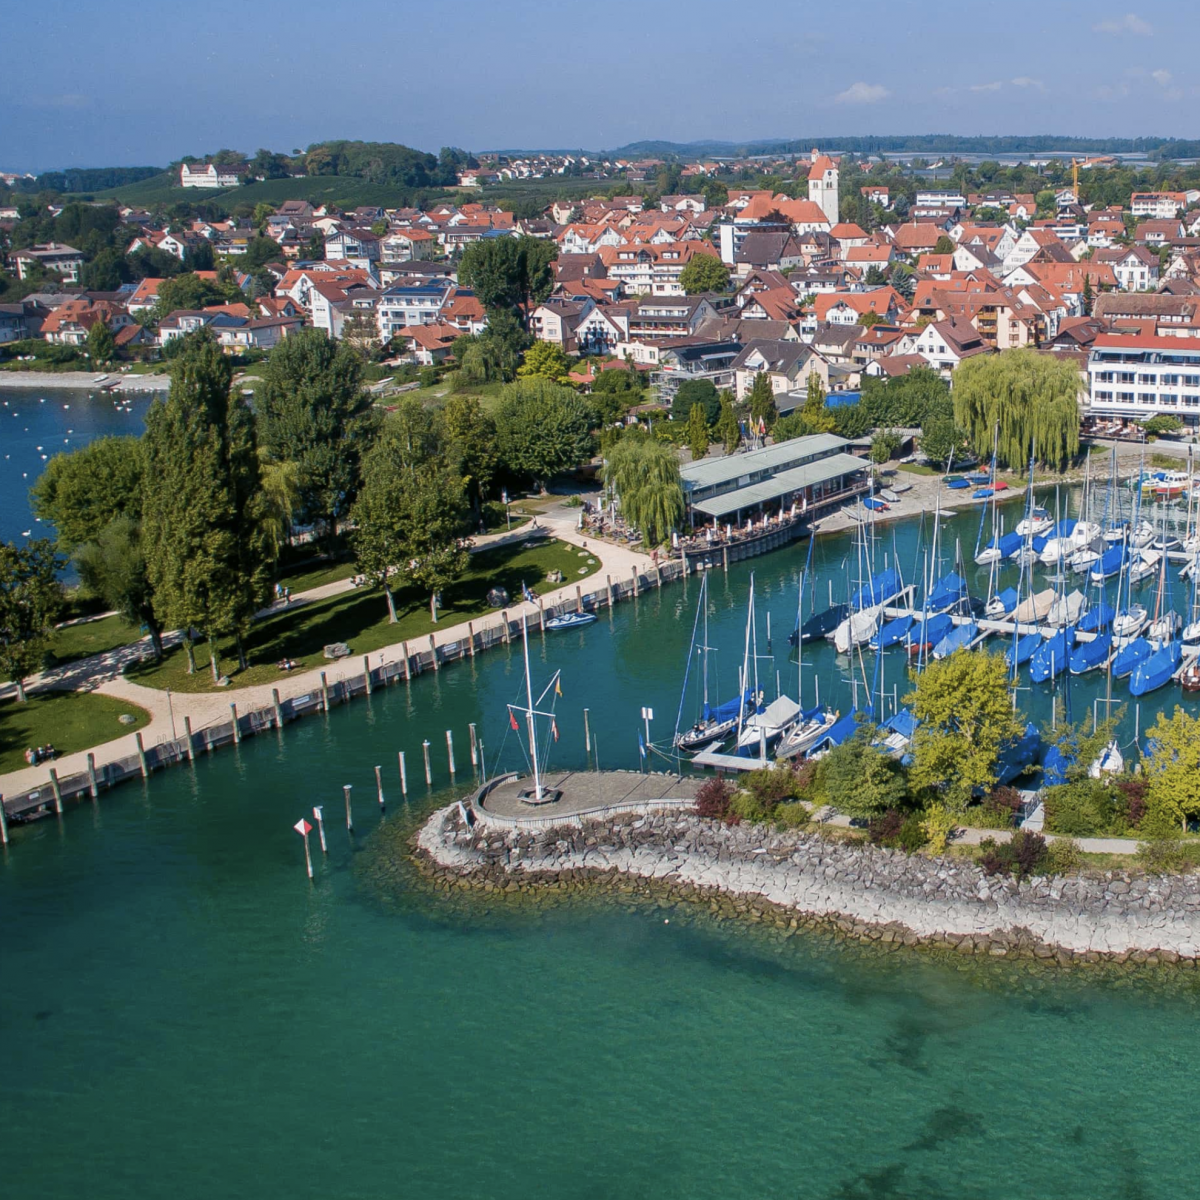 Immenstaad am Bodensee Yachtcharter Bodensee - Hausboot - Motoryacht - Motorboot